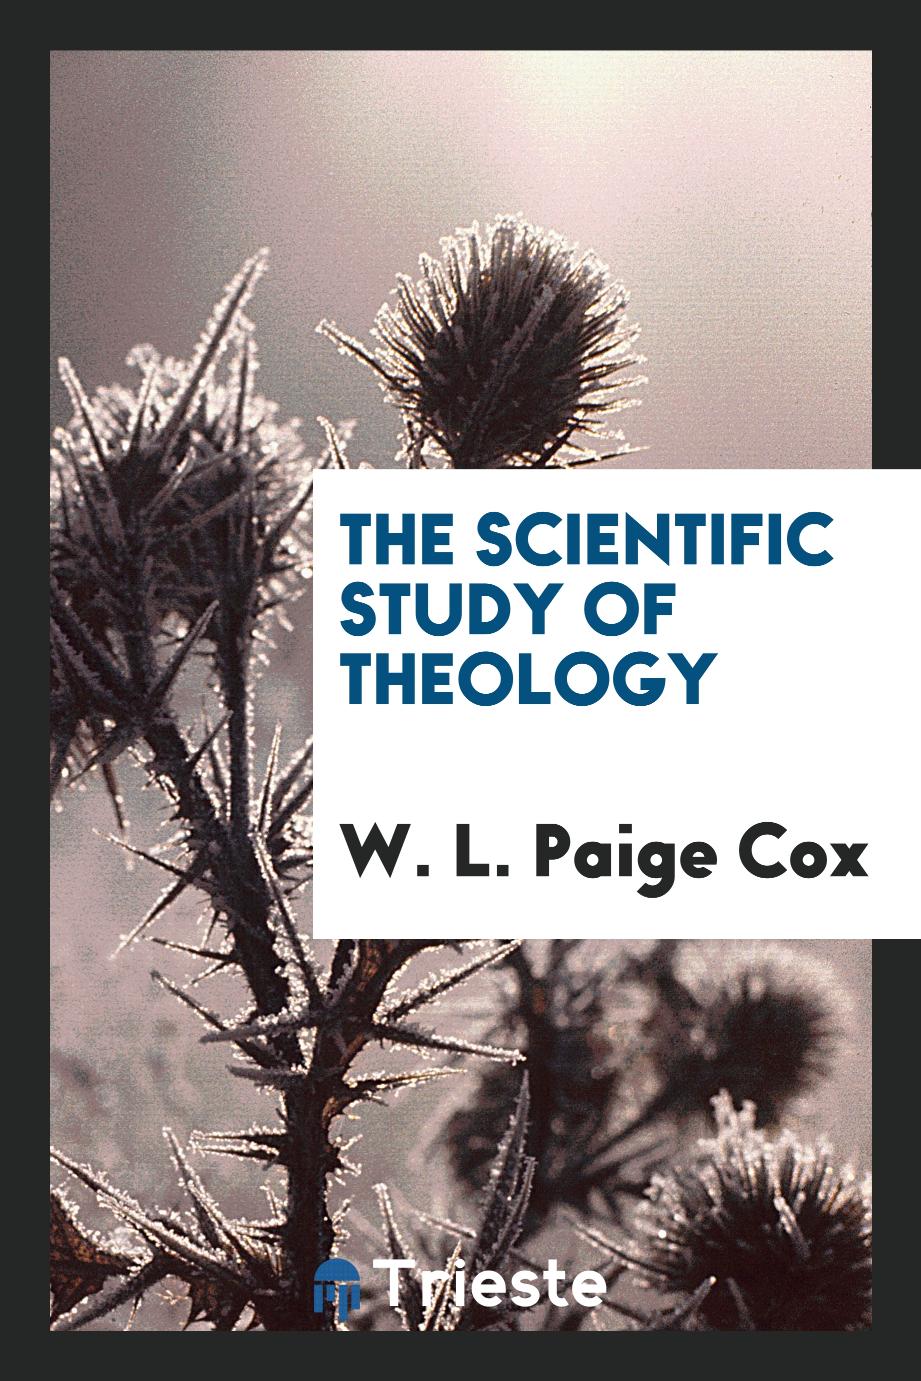 The scientific study of theology